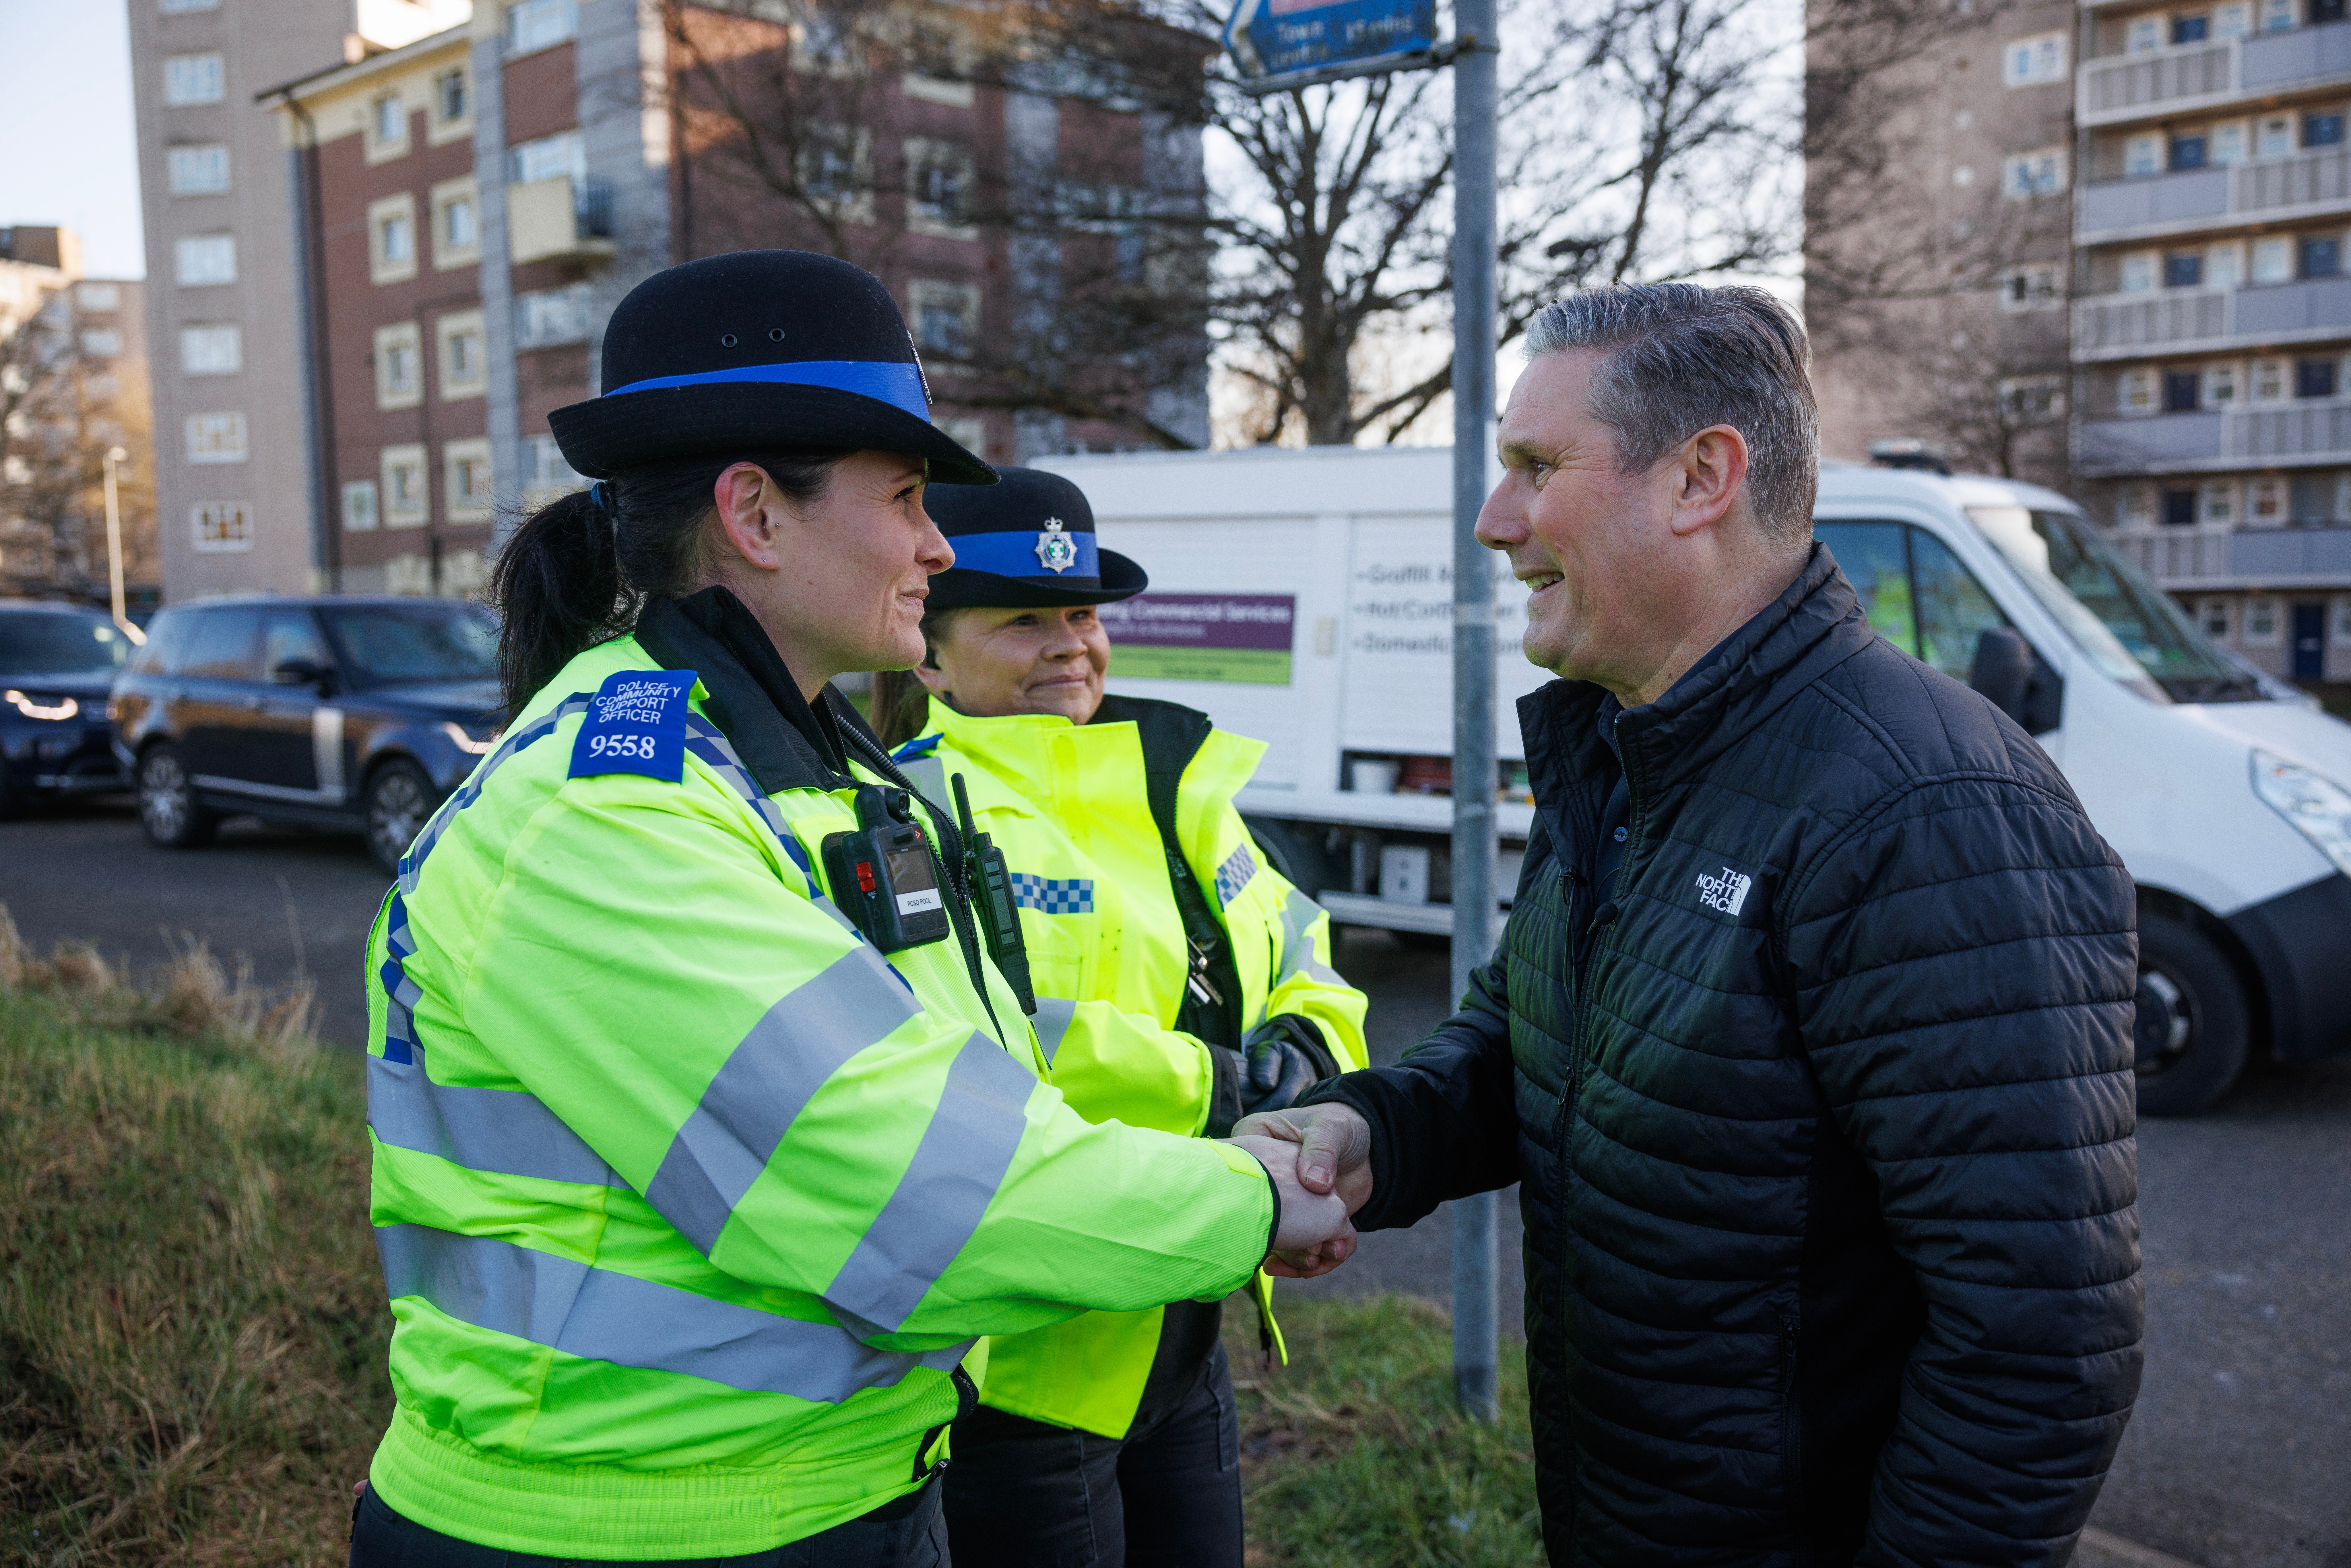 Labour’s plan has been backed by high profile policing figures